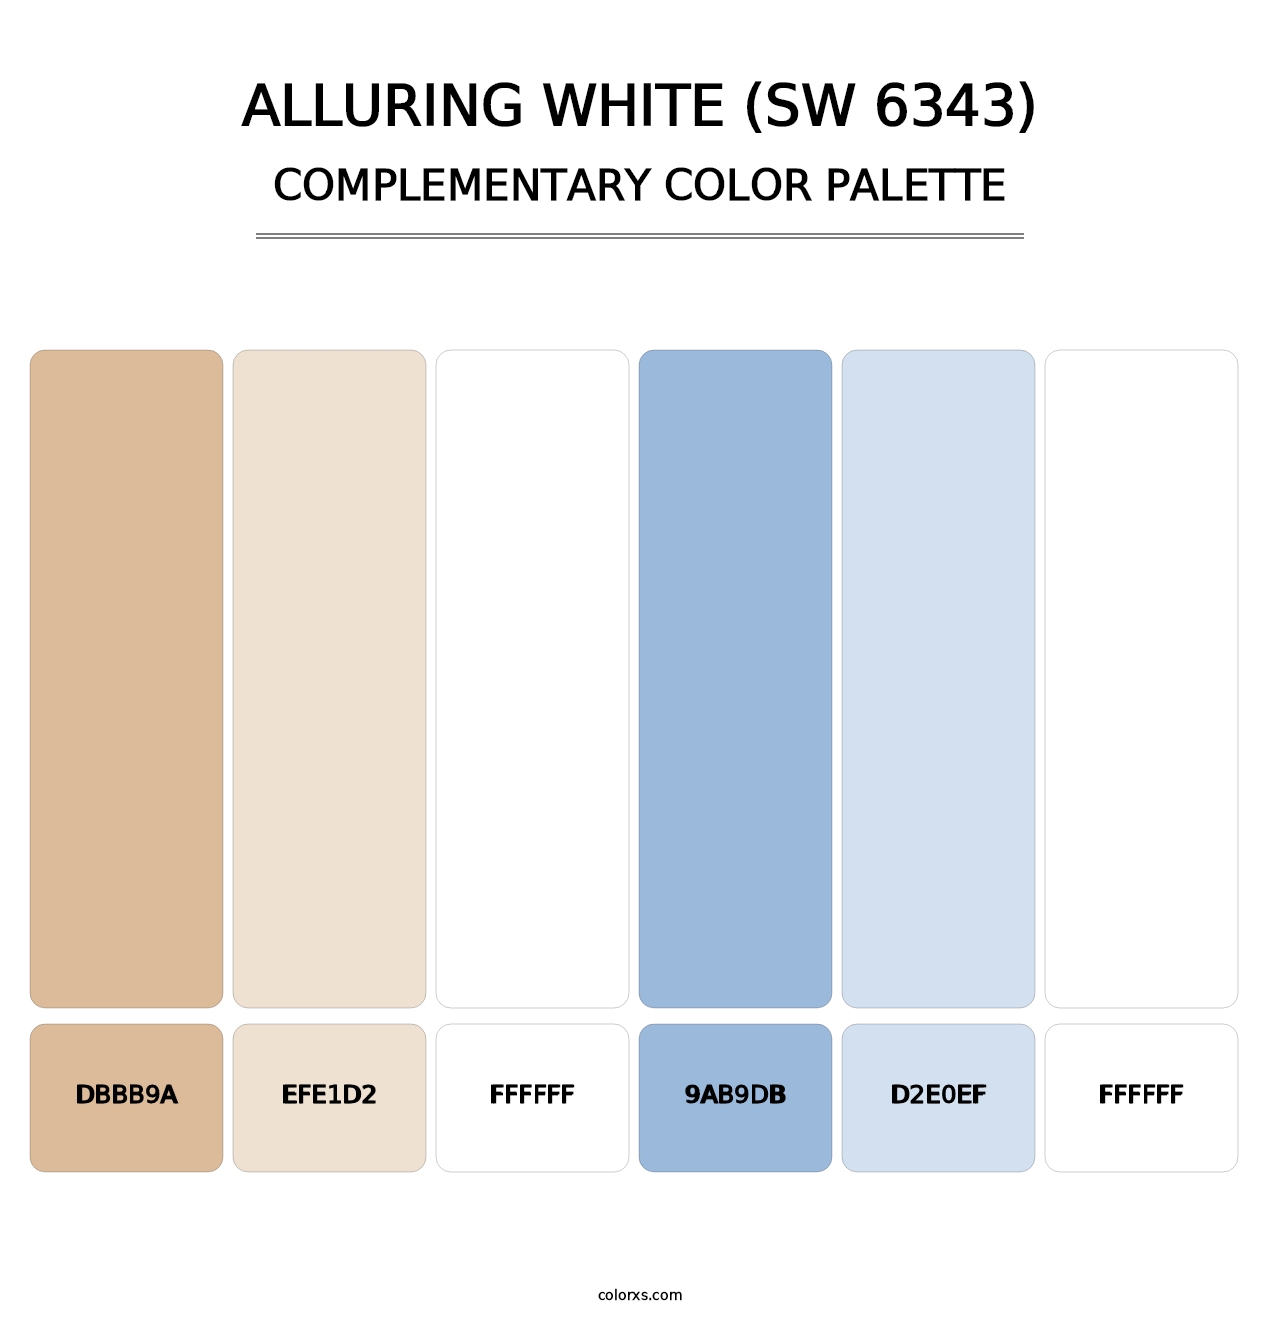 Alluring White (SW 6343) - Complementary Color Palette